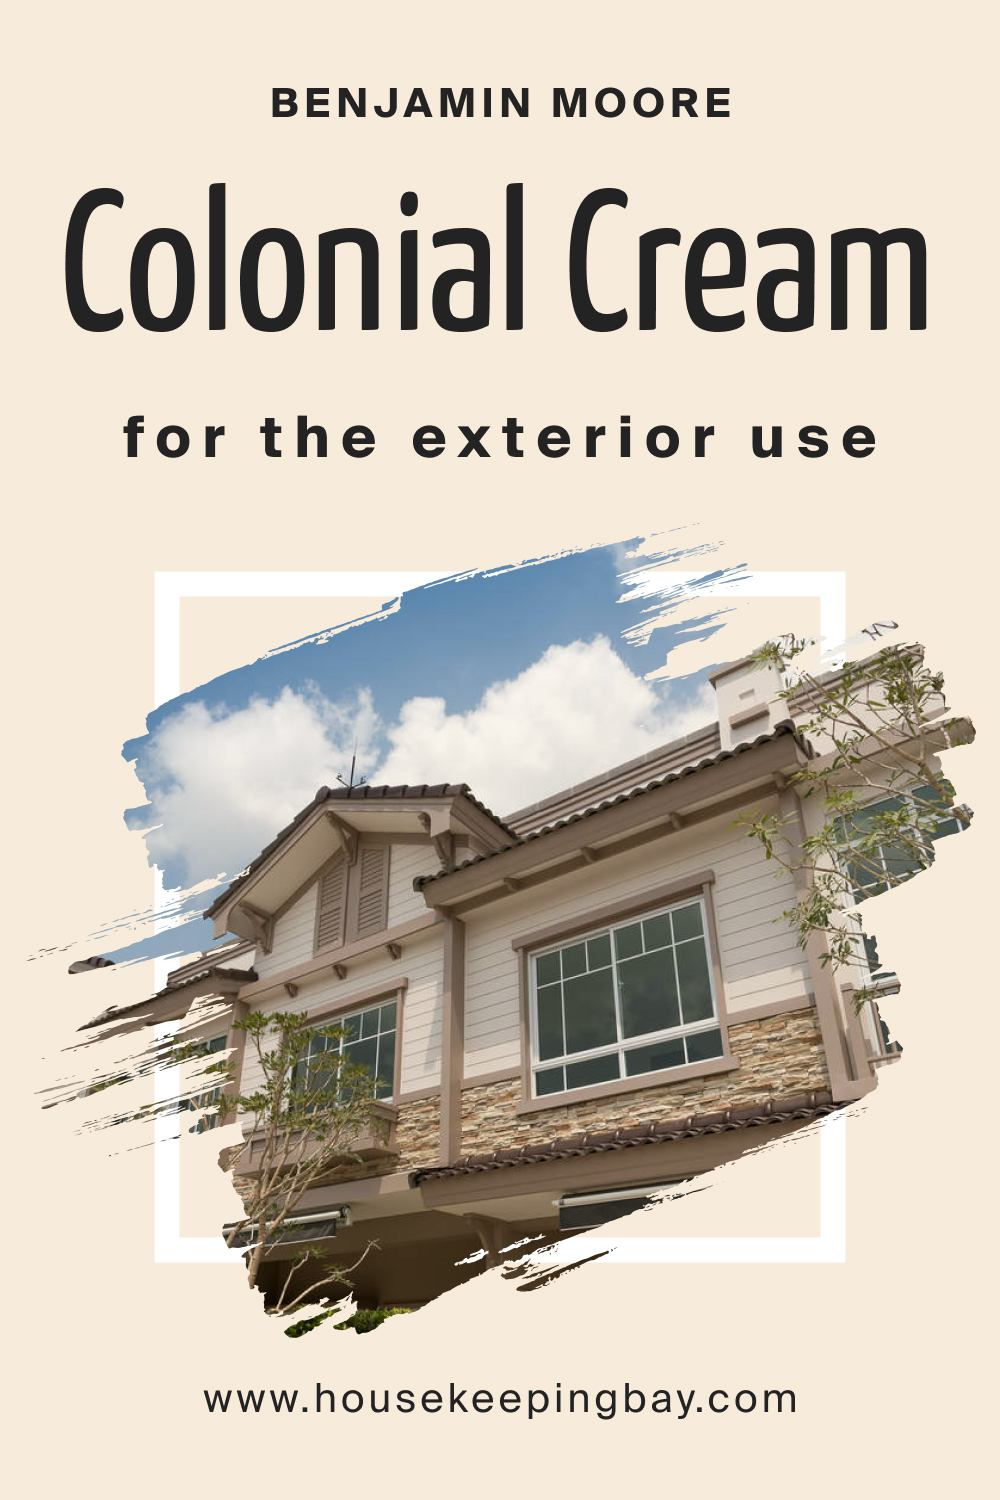 Benjamin Moore. Colonial Cream OC 77 for the Exterior Use